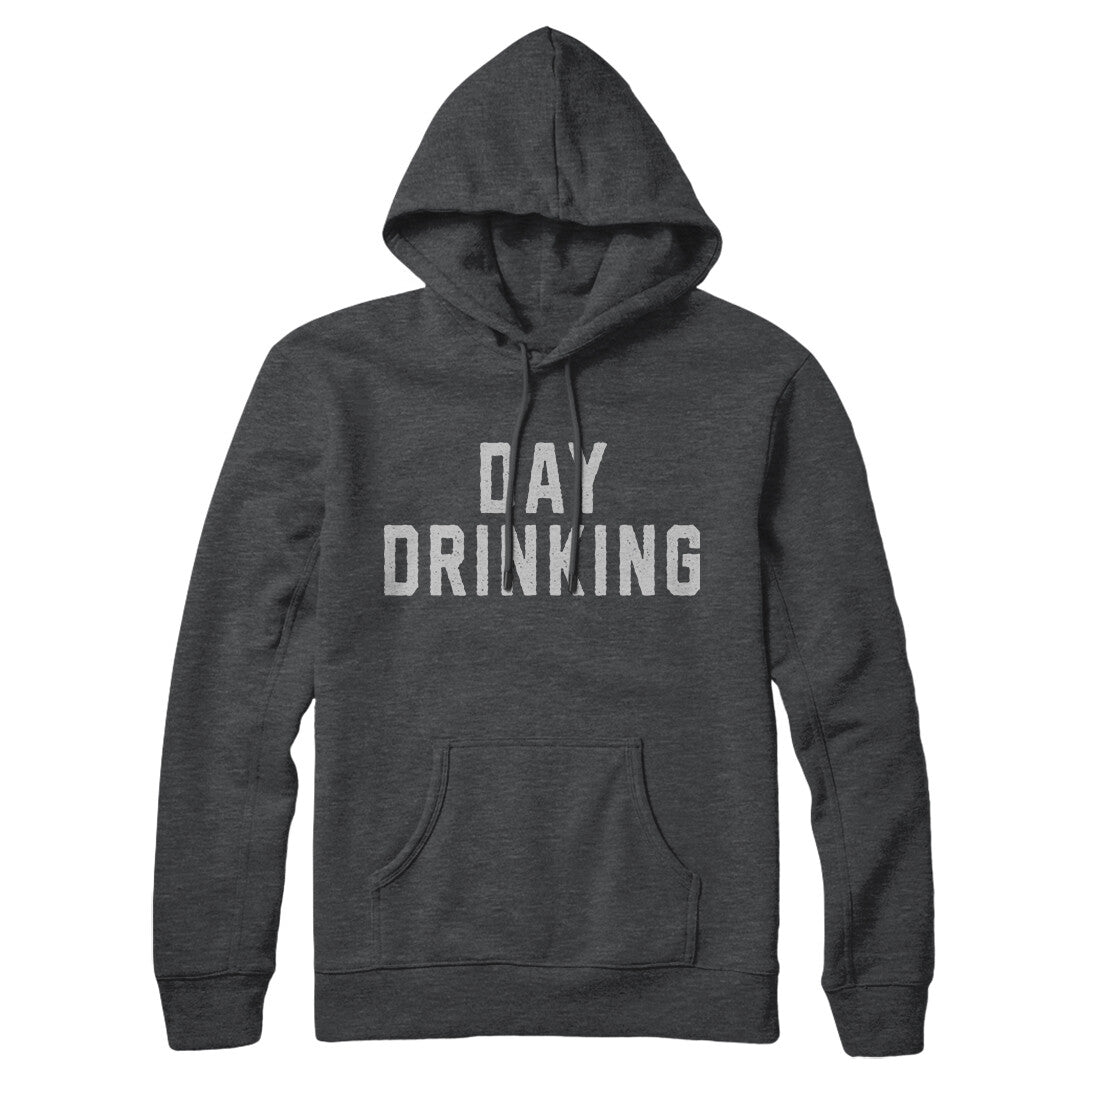 Day Drinking in Charcoal Heather Color